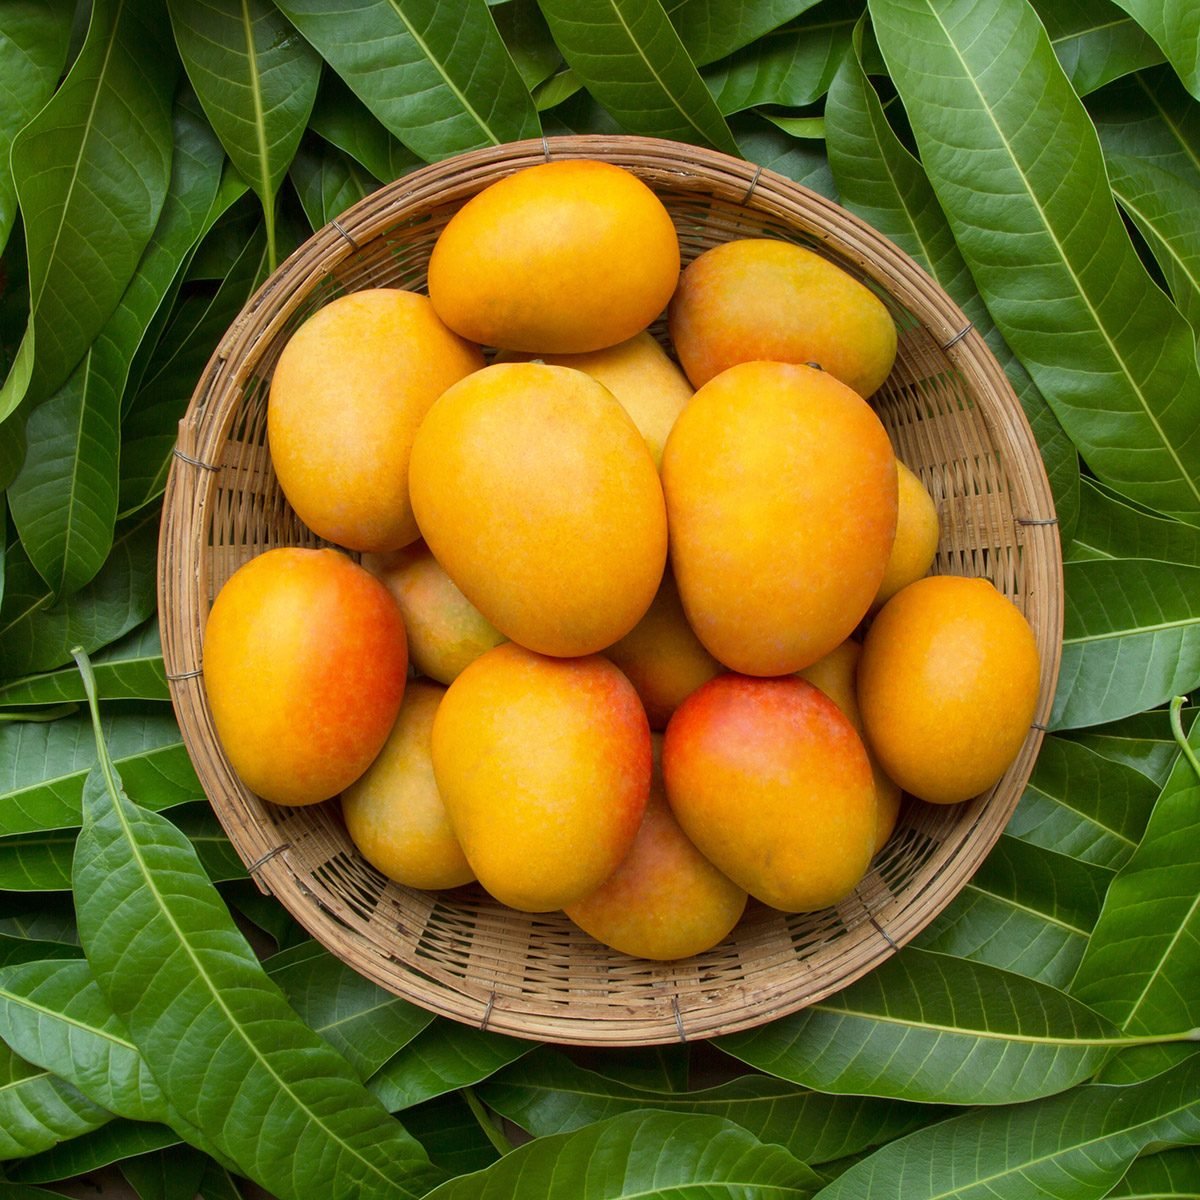 9 Benefits of Mango That You Should Know